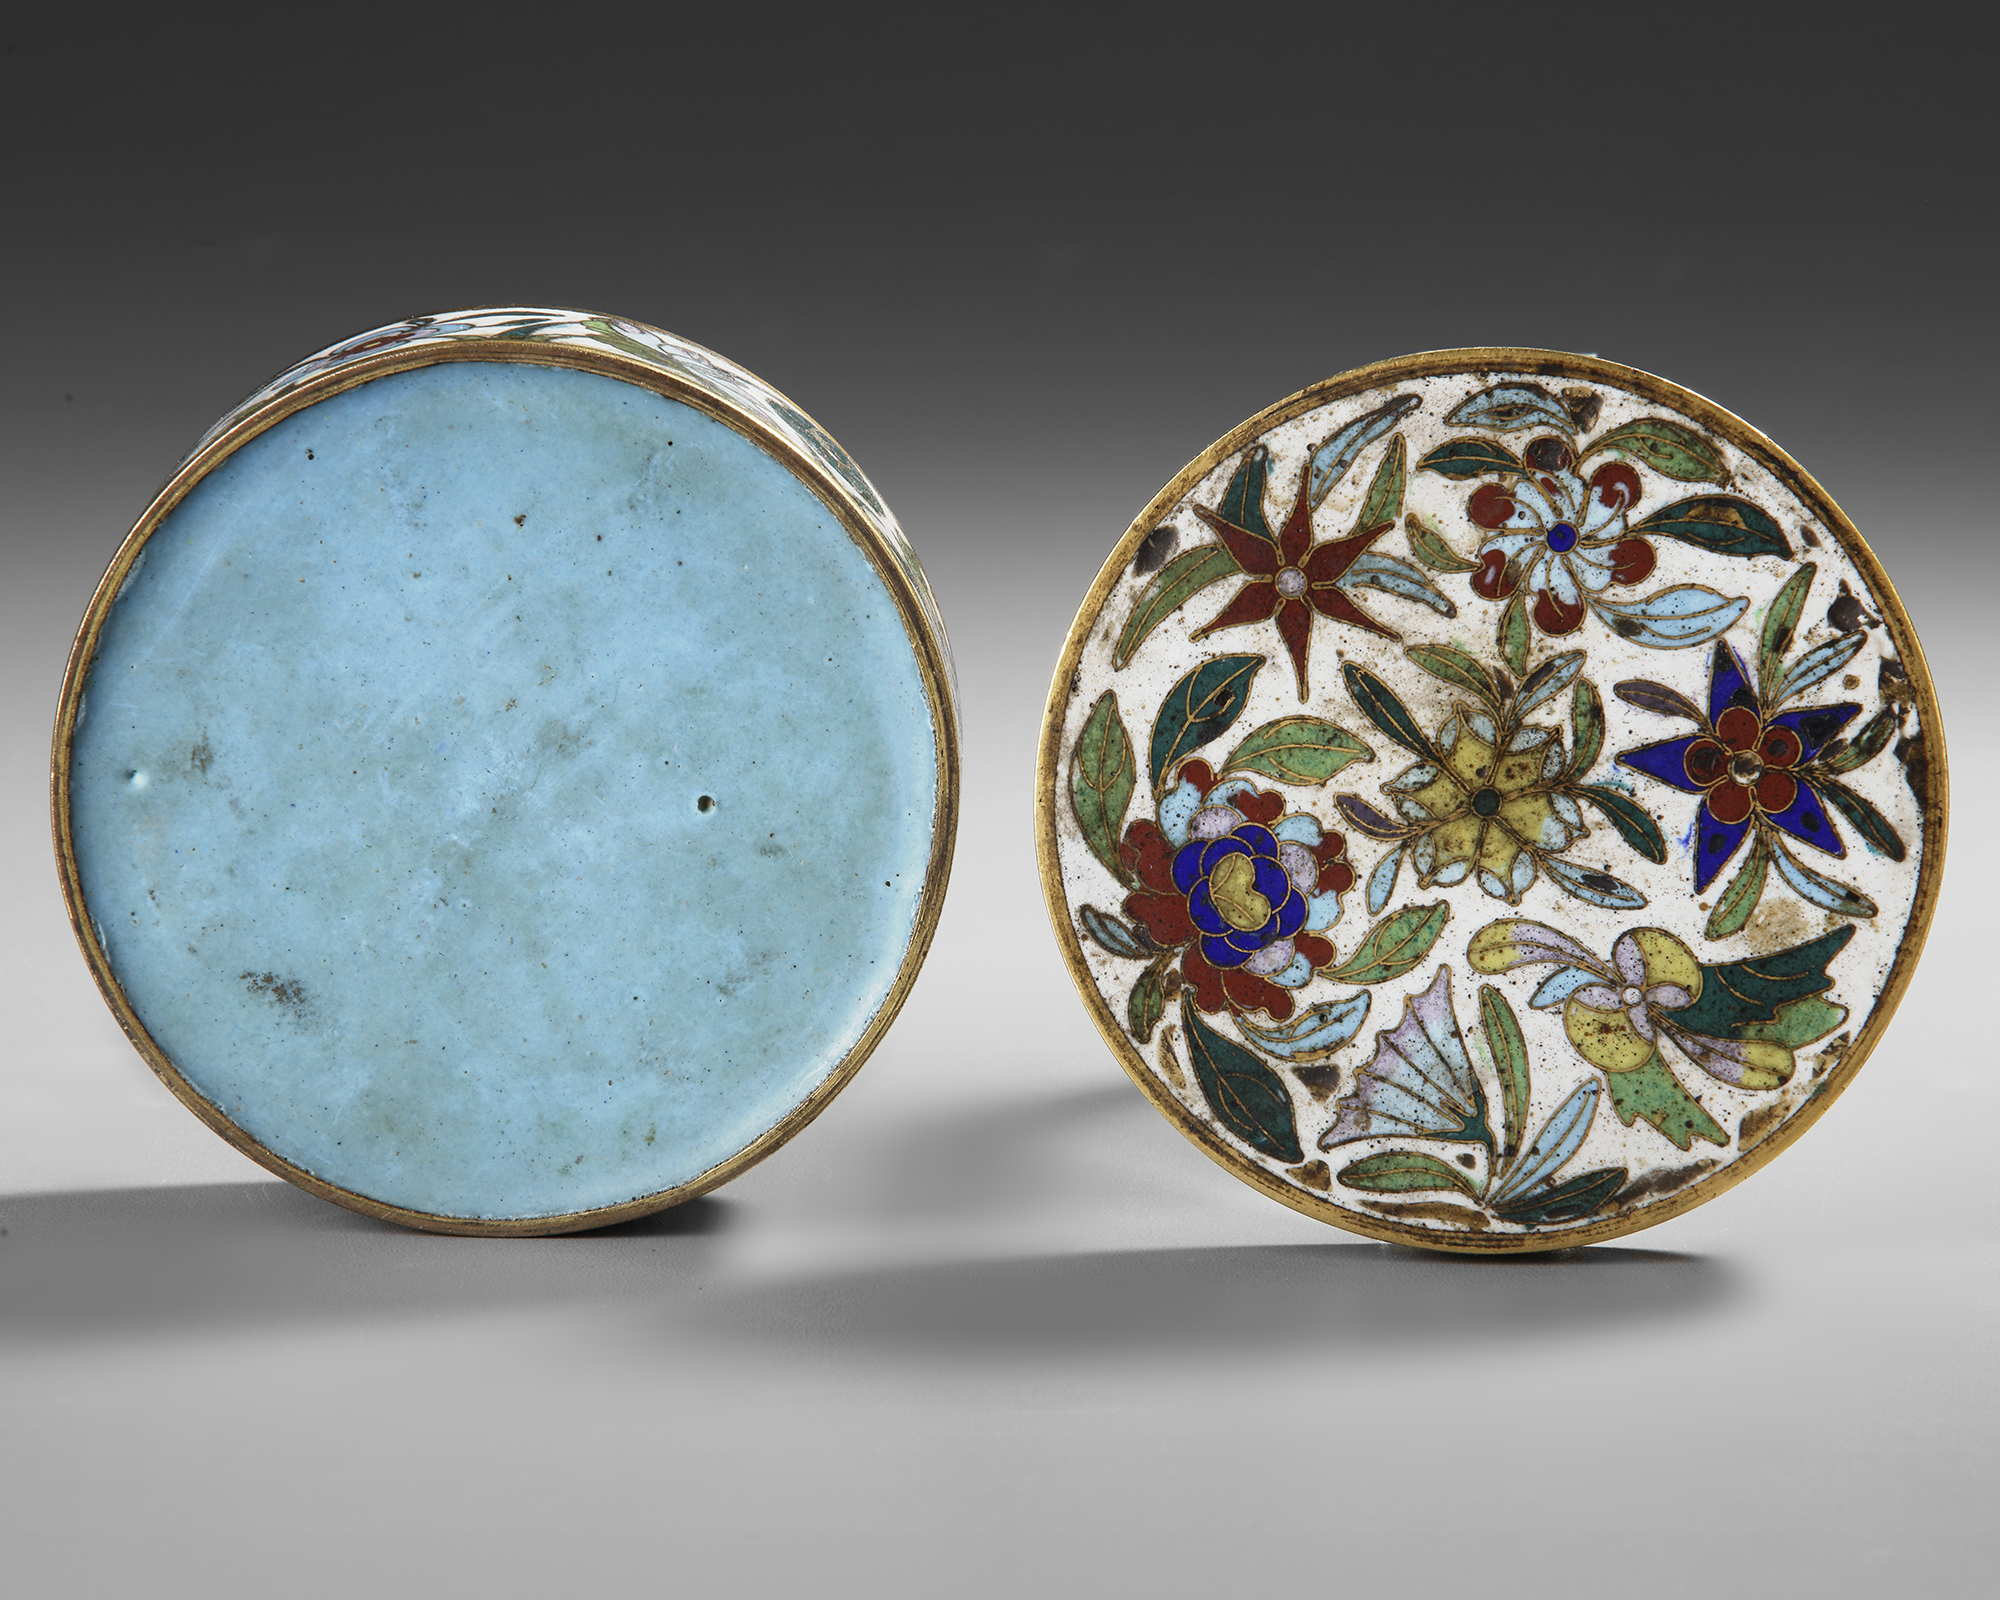 A CHINESE CLOISONNÉ ENAMEL BOX, 19TH CENTURY - Image 4 of 4